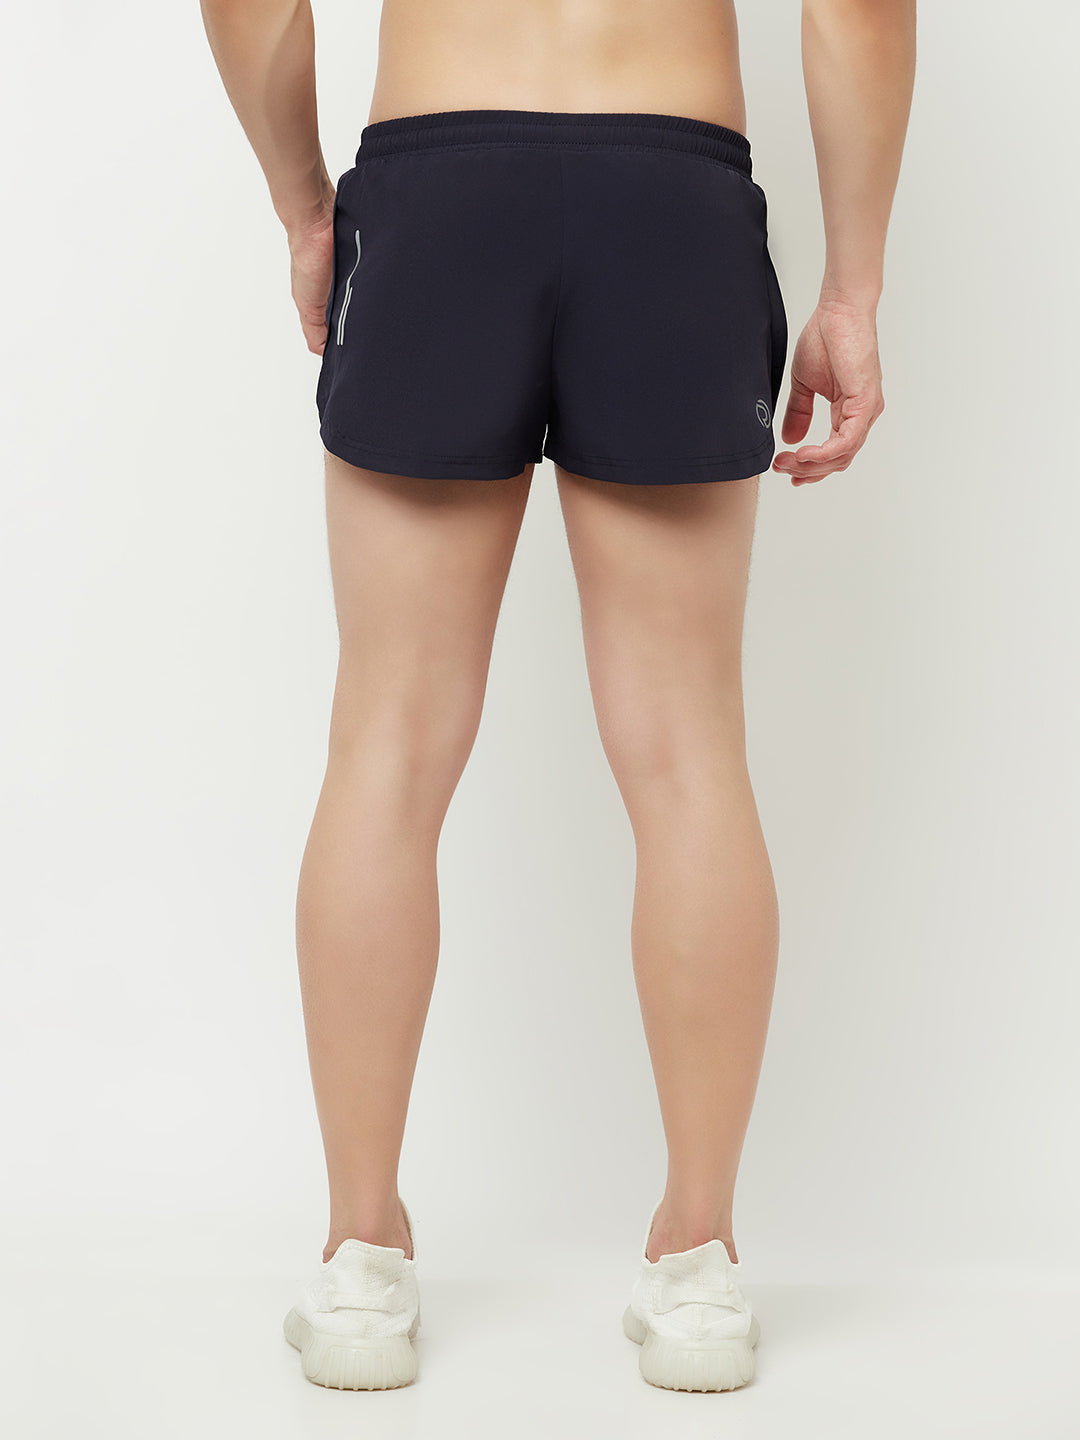 Pro 2" Shorts with Inner Brief and Key Pocket